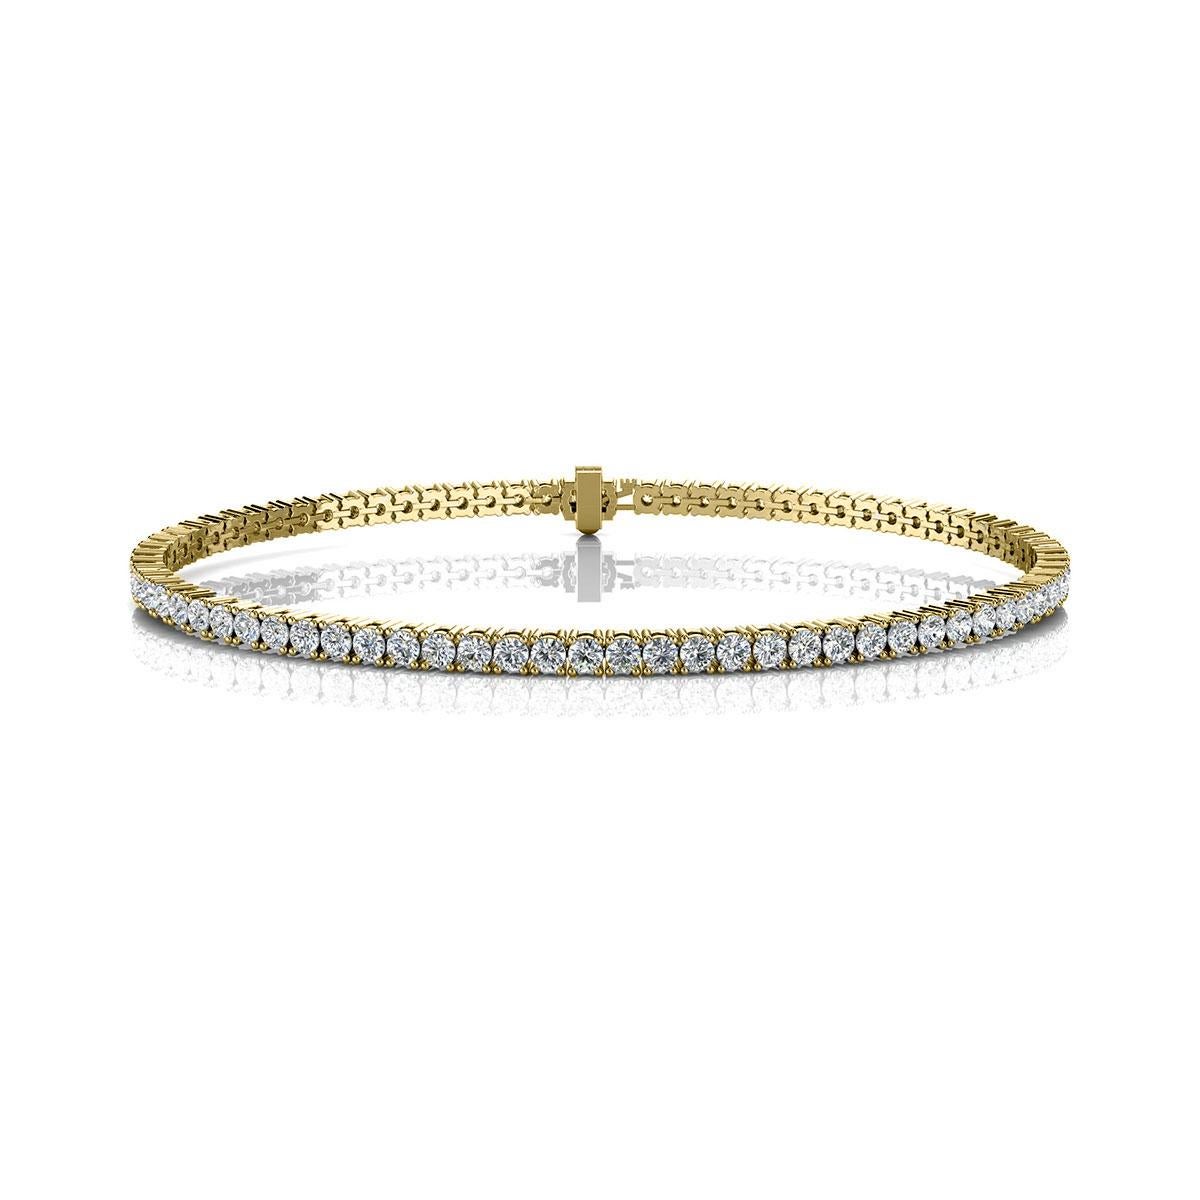 A timeless four prongs diamonds tennis bracelet. Experience the Difference!

Product details: 

Center Gemstone Type: NATURAL DIAMOND
Center Gemstone Color: WHITE
Center Gemstone Shape: ROUND
Center Diamond Carat Weight: 3
Metal: 18K Yellow